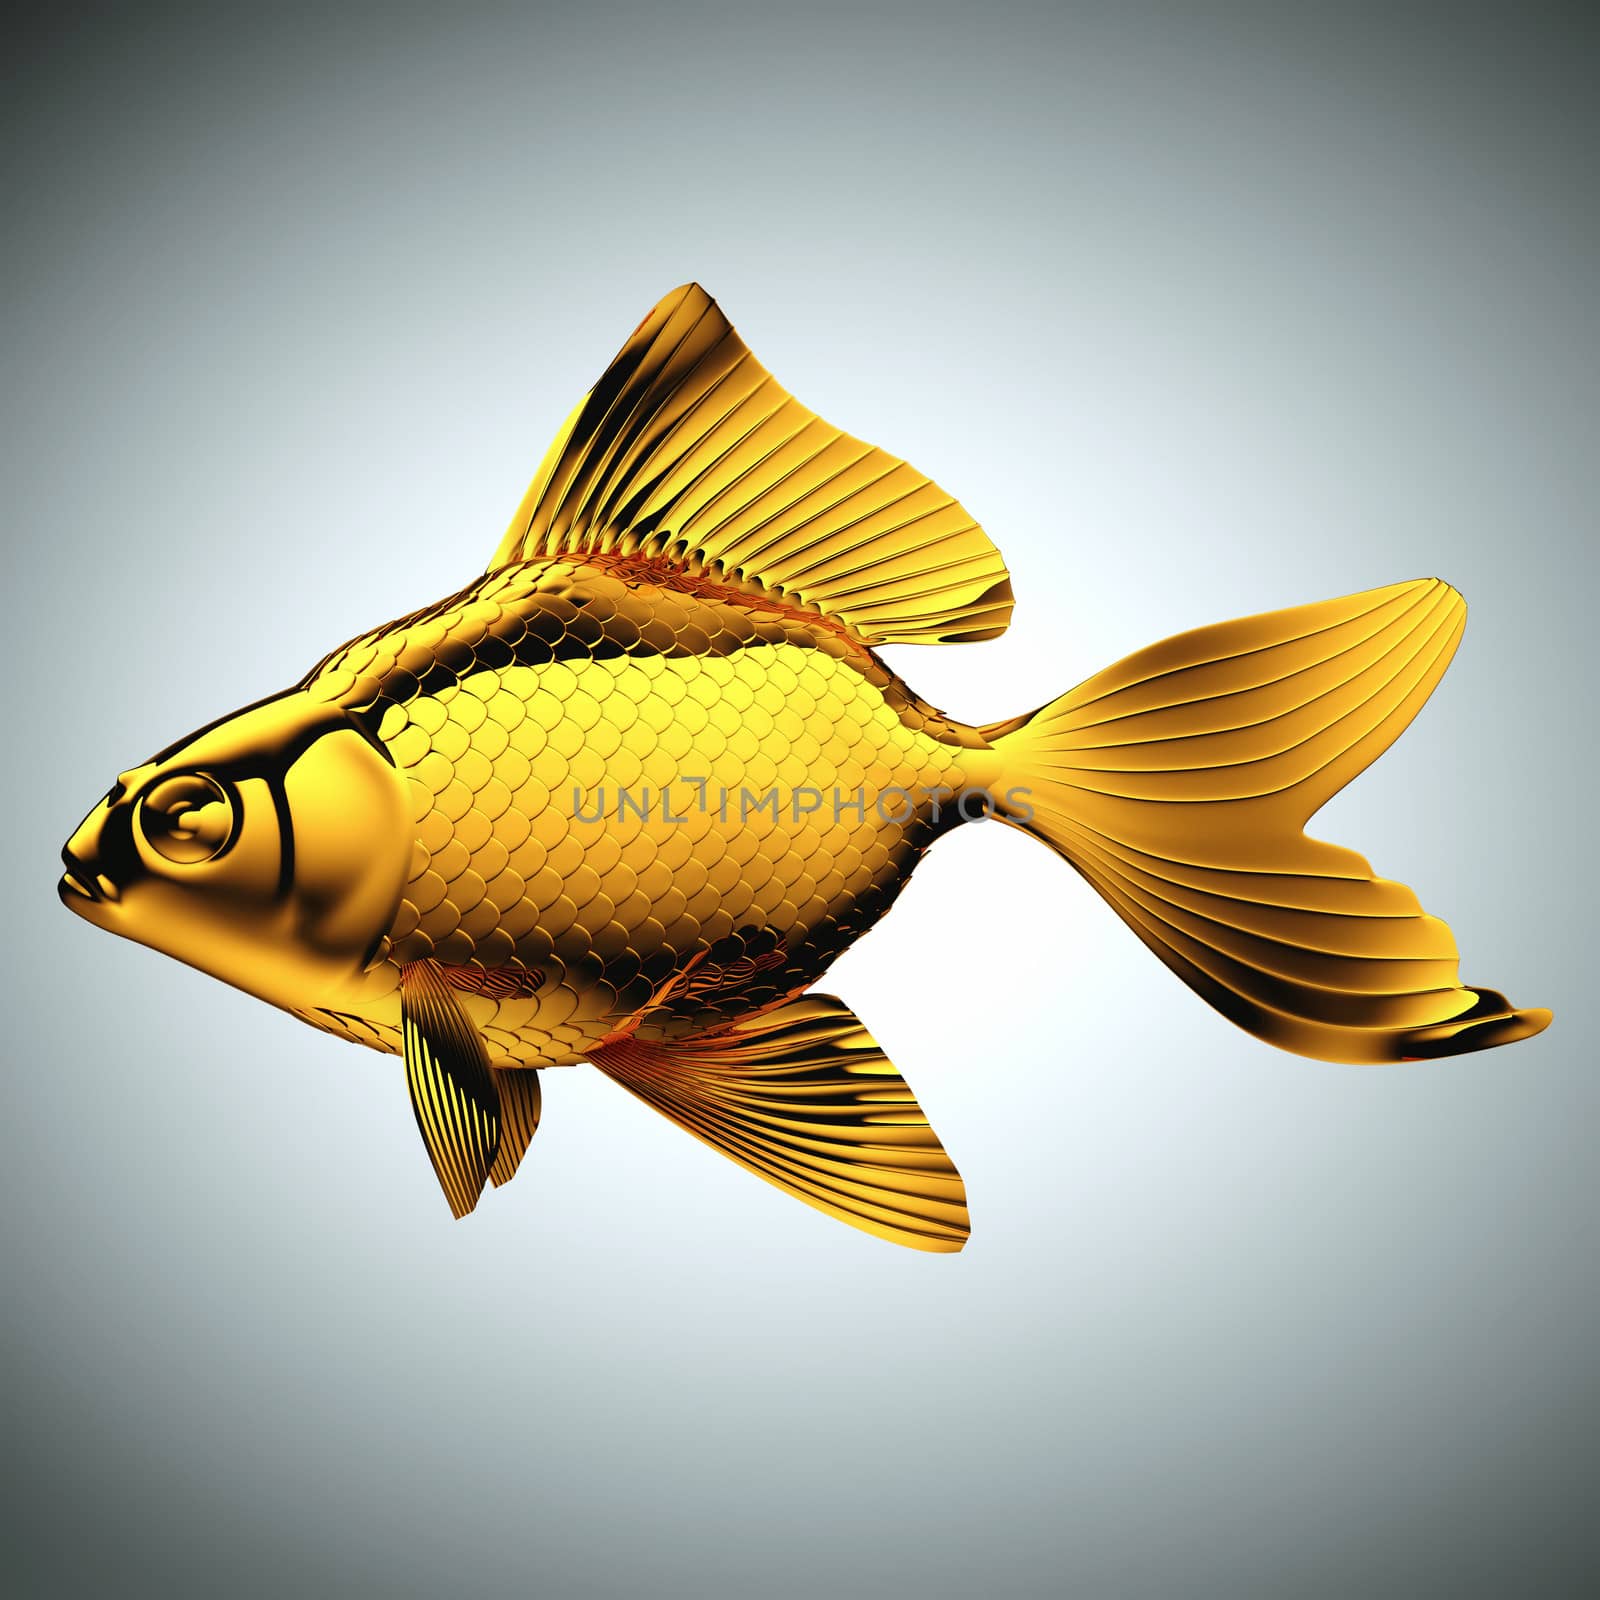 Goldfish made of gold over gray background